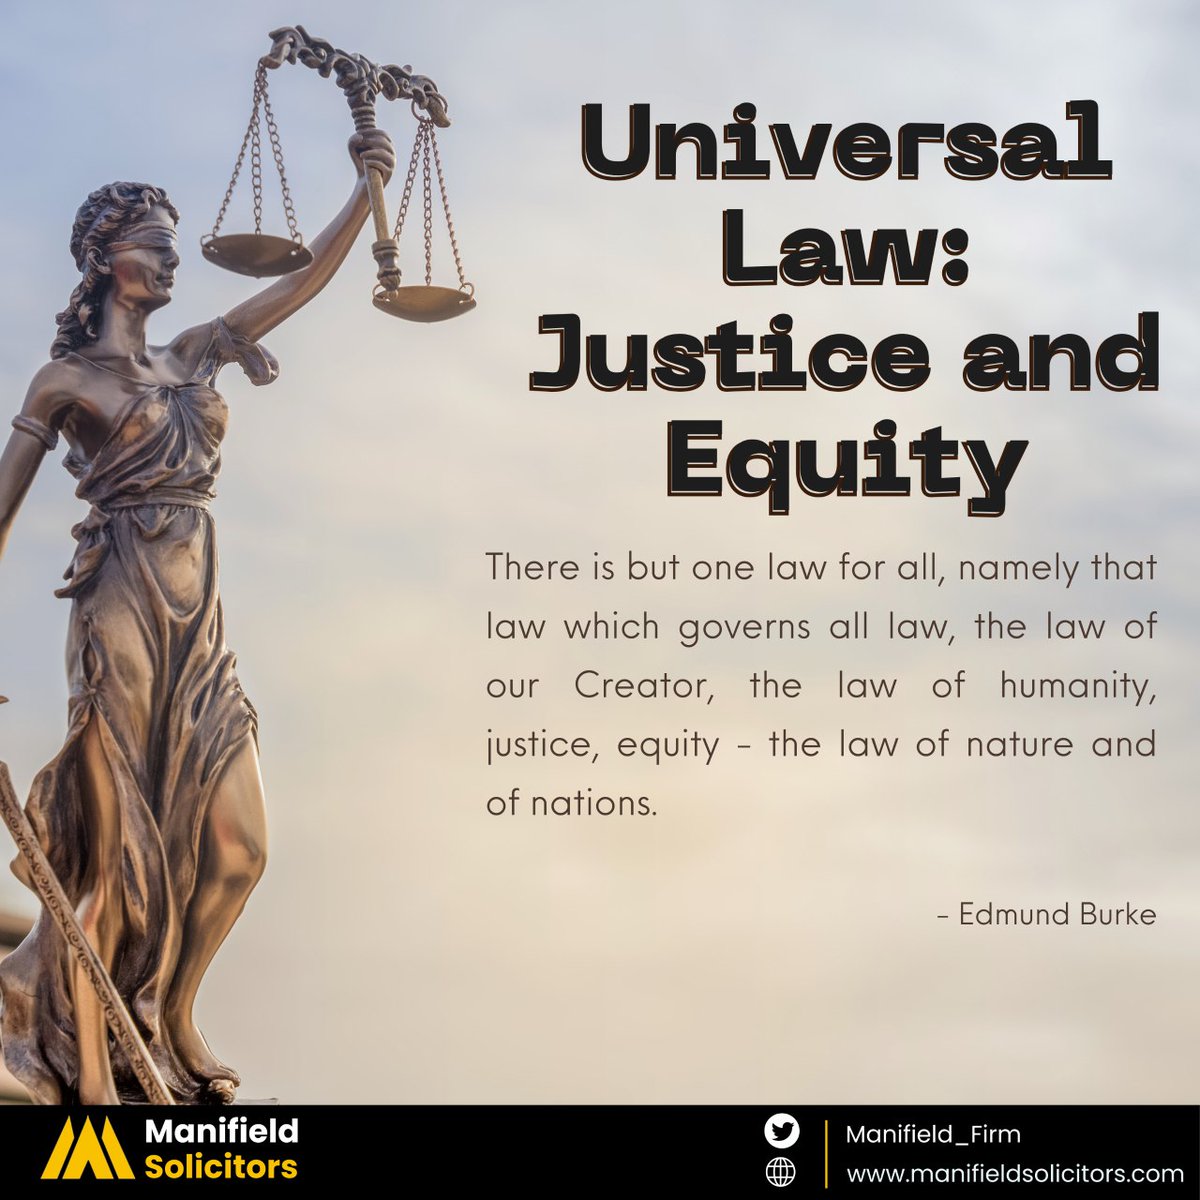 Reflecting on the timeless essence of law - the guiding principles that shape our society and uphold justice. At Manifield Solicitors, we're committed to navigating the complexities of law with integrity and compassion. Join the conversation.

#LawAndJustice #LegalPrinciples #MS